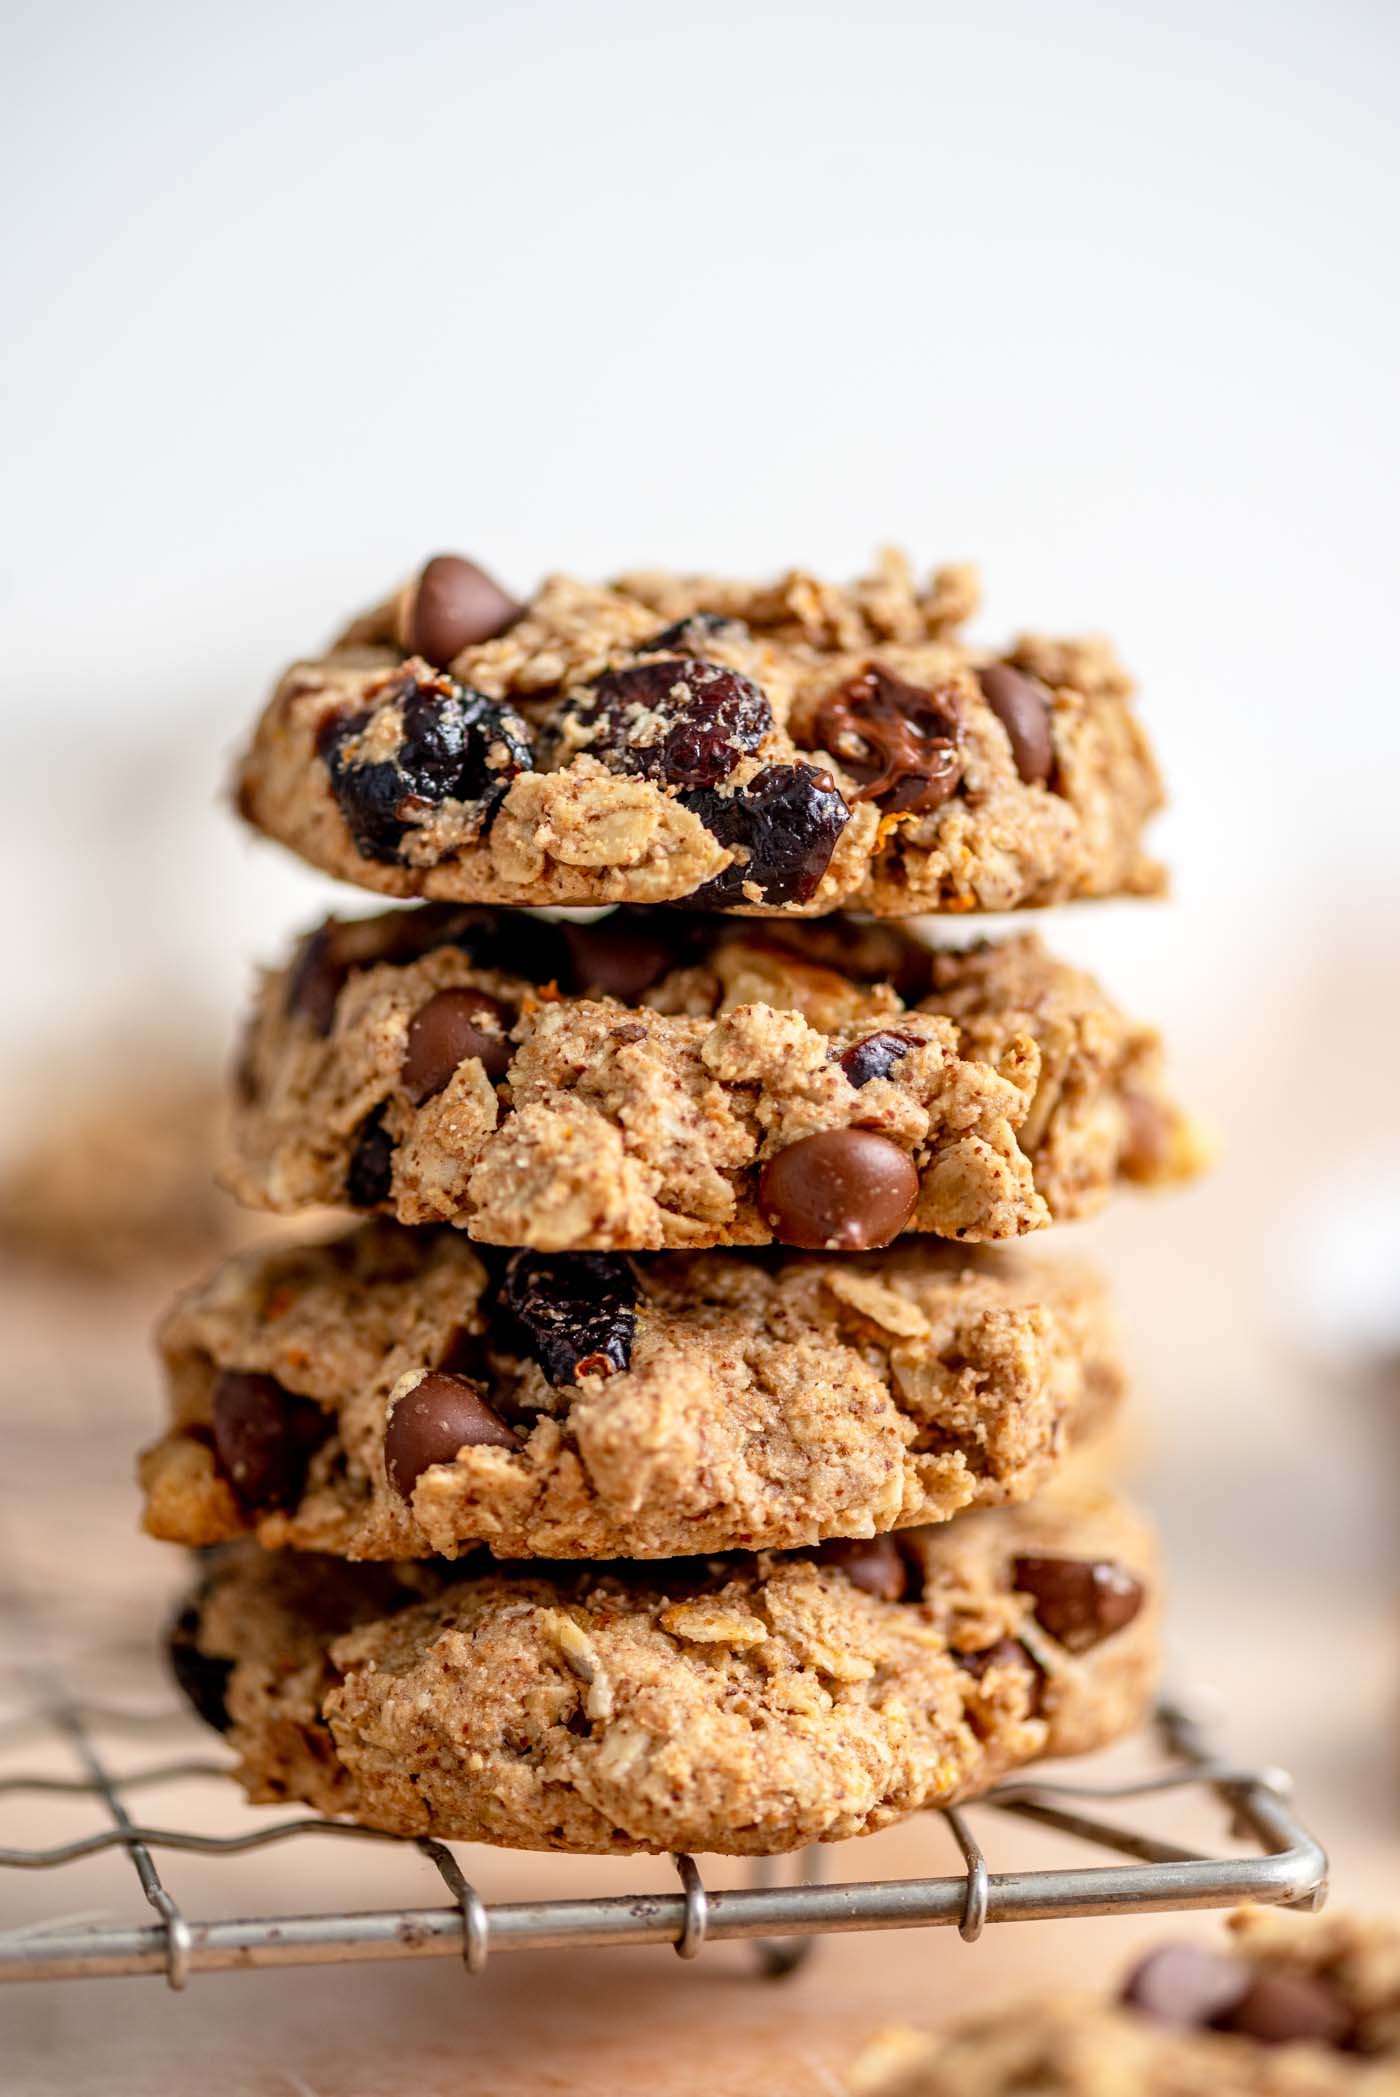 Stack of 4 oatmeal cookies with cranberries, walnuts and chocolate chips in them sitting on the edge of a wire baking rack.